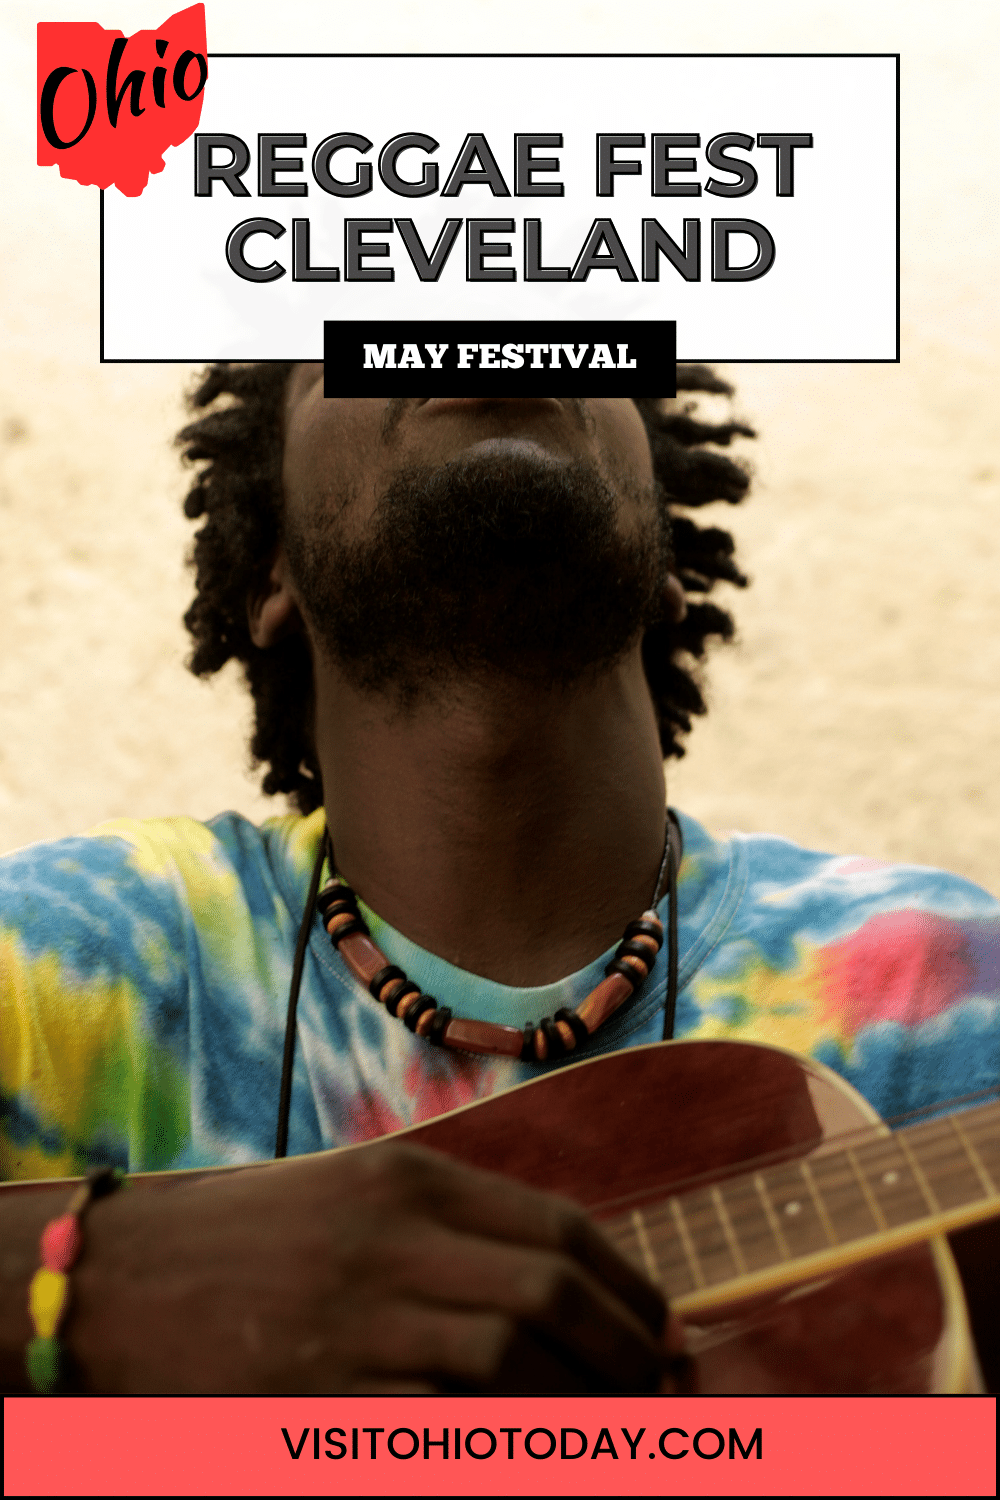 Reggae Fest Cleveland is a reggae music festival that will take place at Voinovich Park in Cleveland in late May.